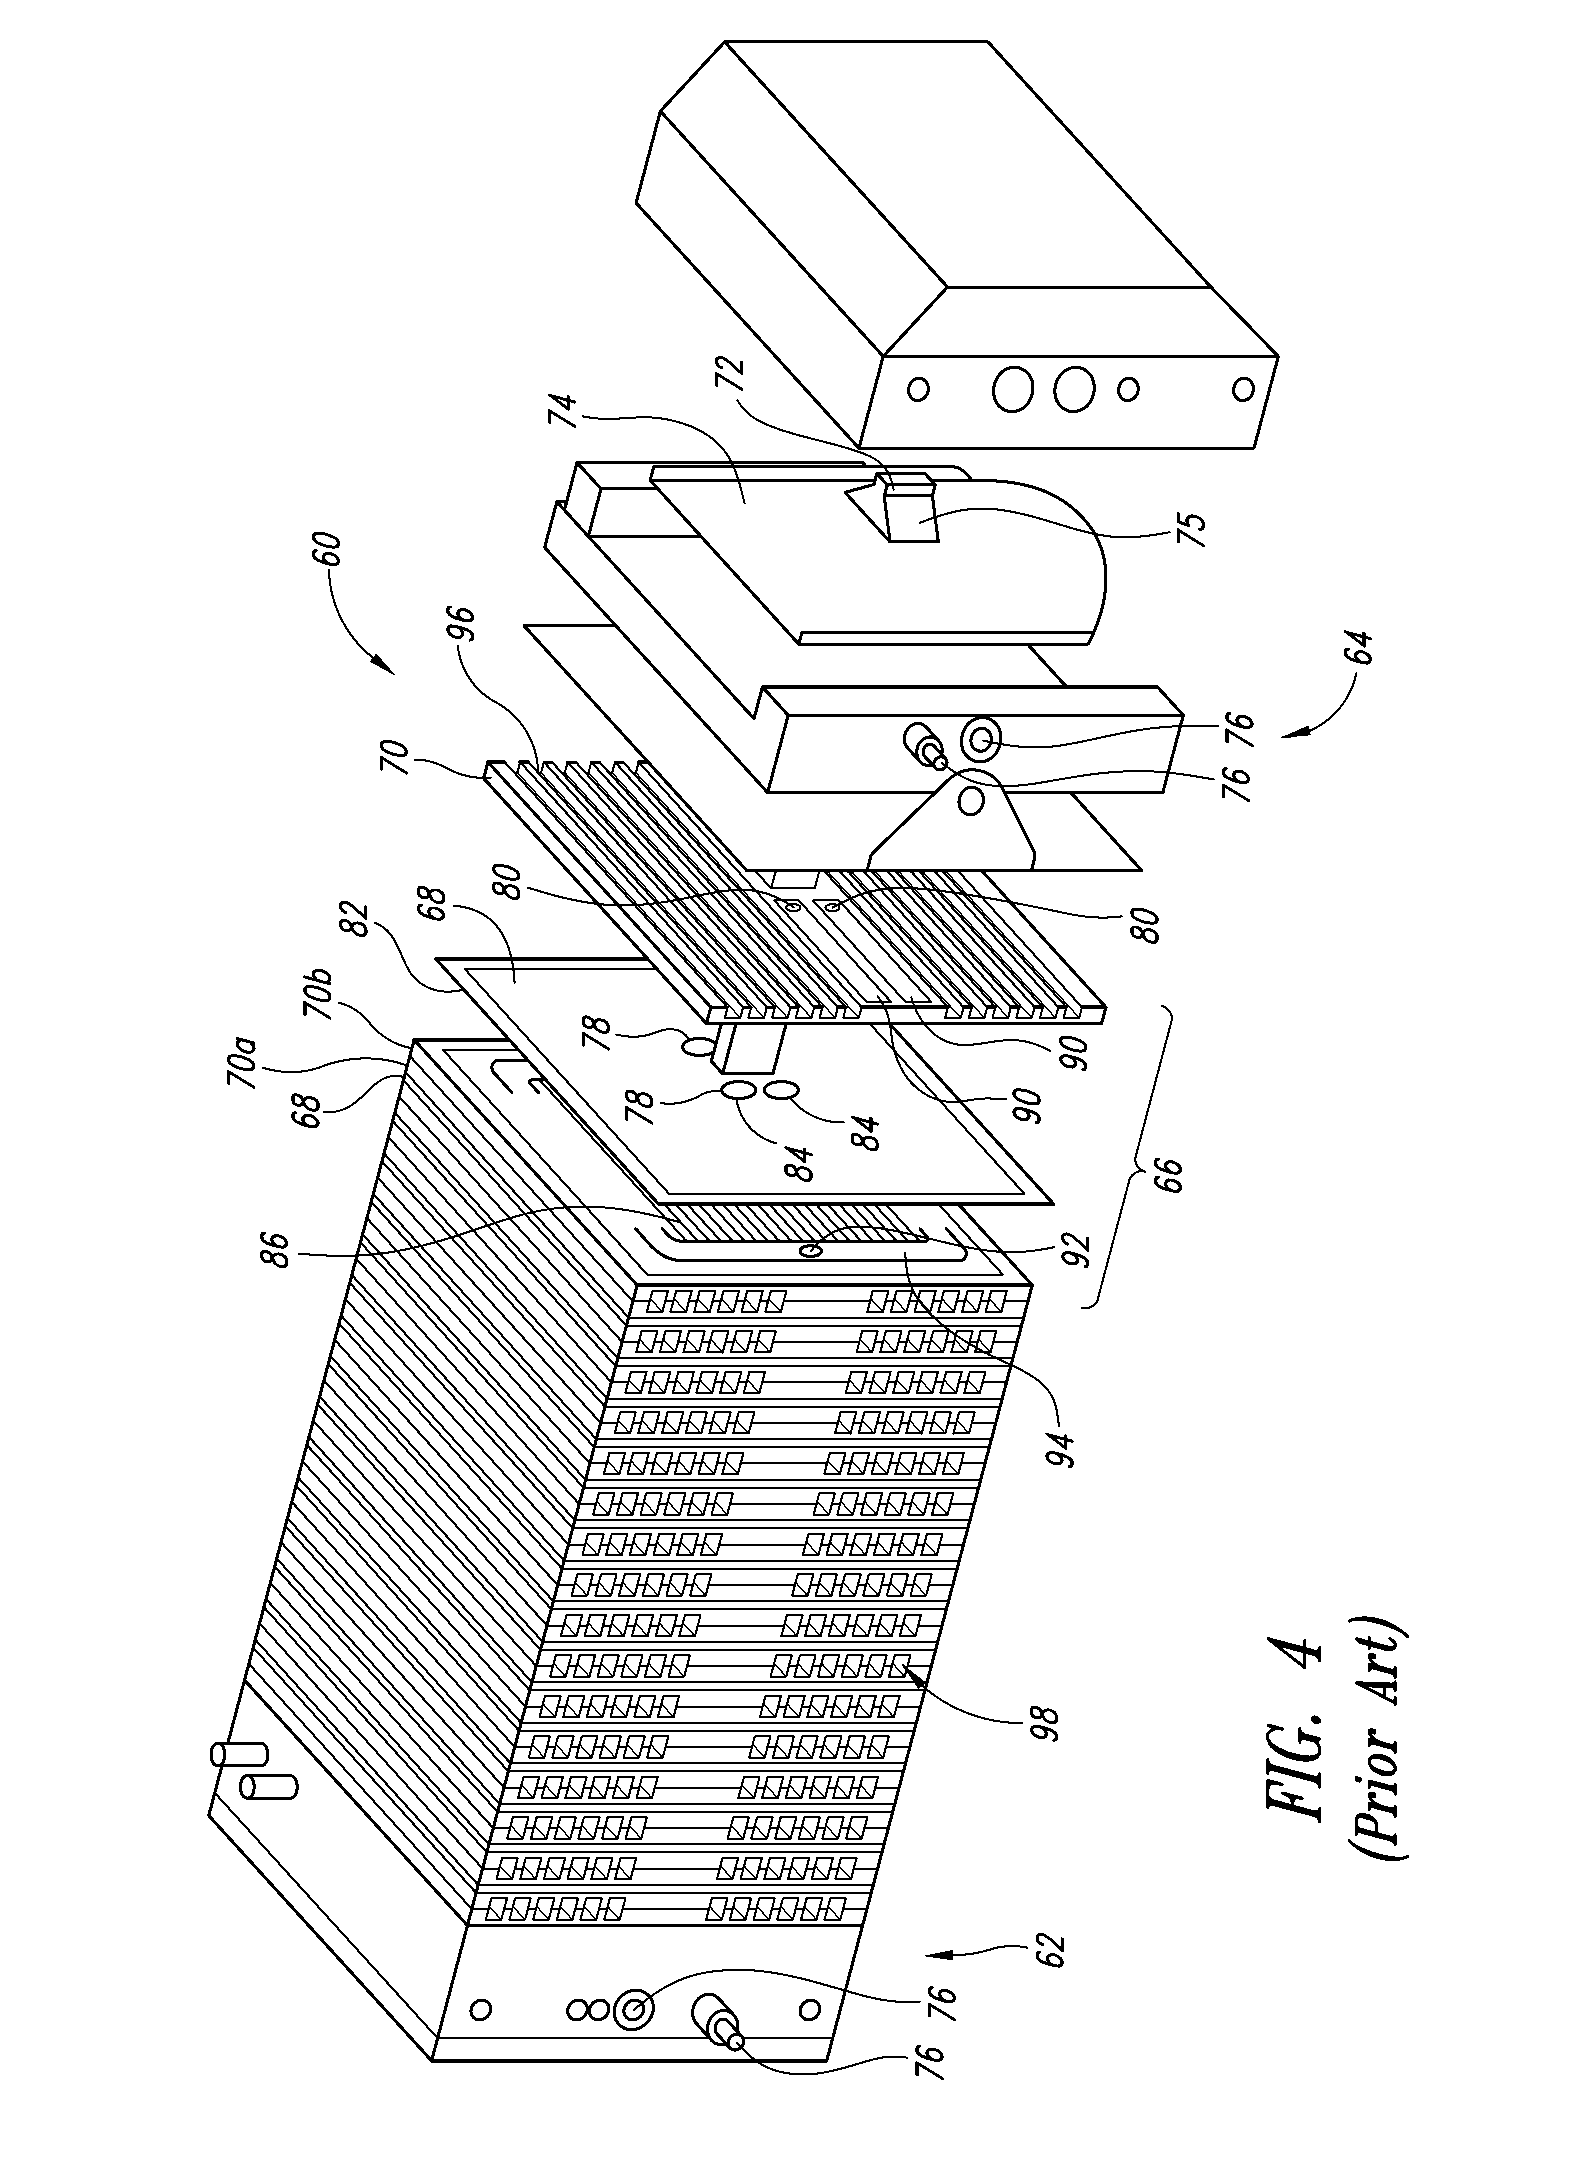 Apparatus and method for managing fluids in a fuel cell stack